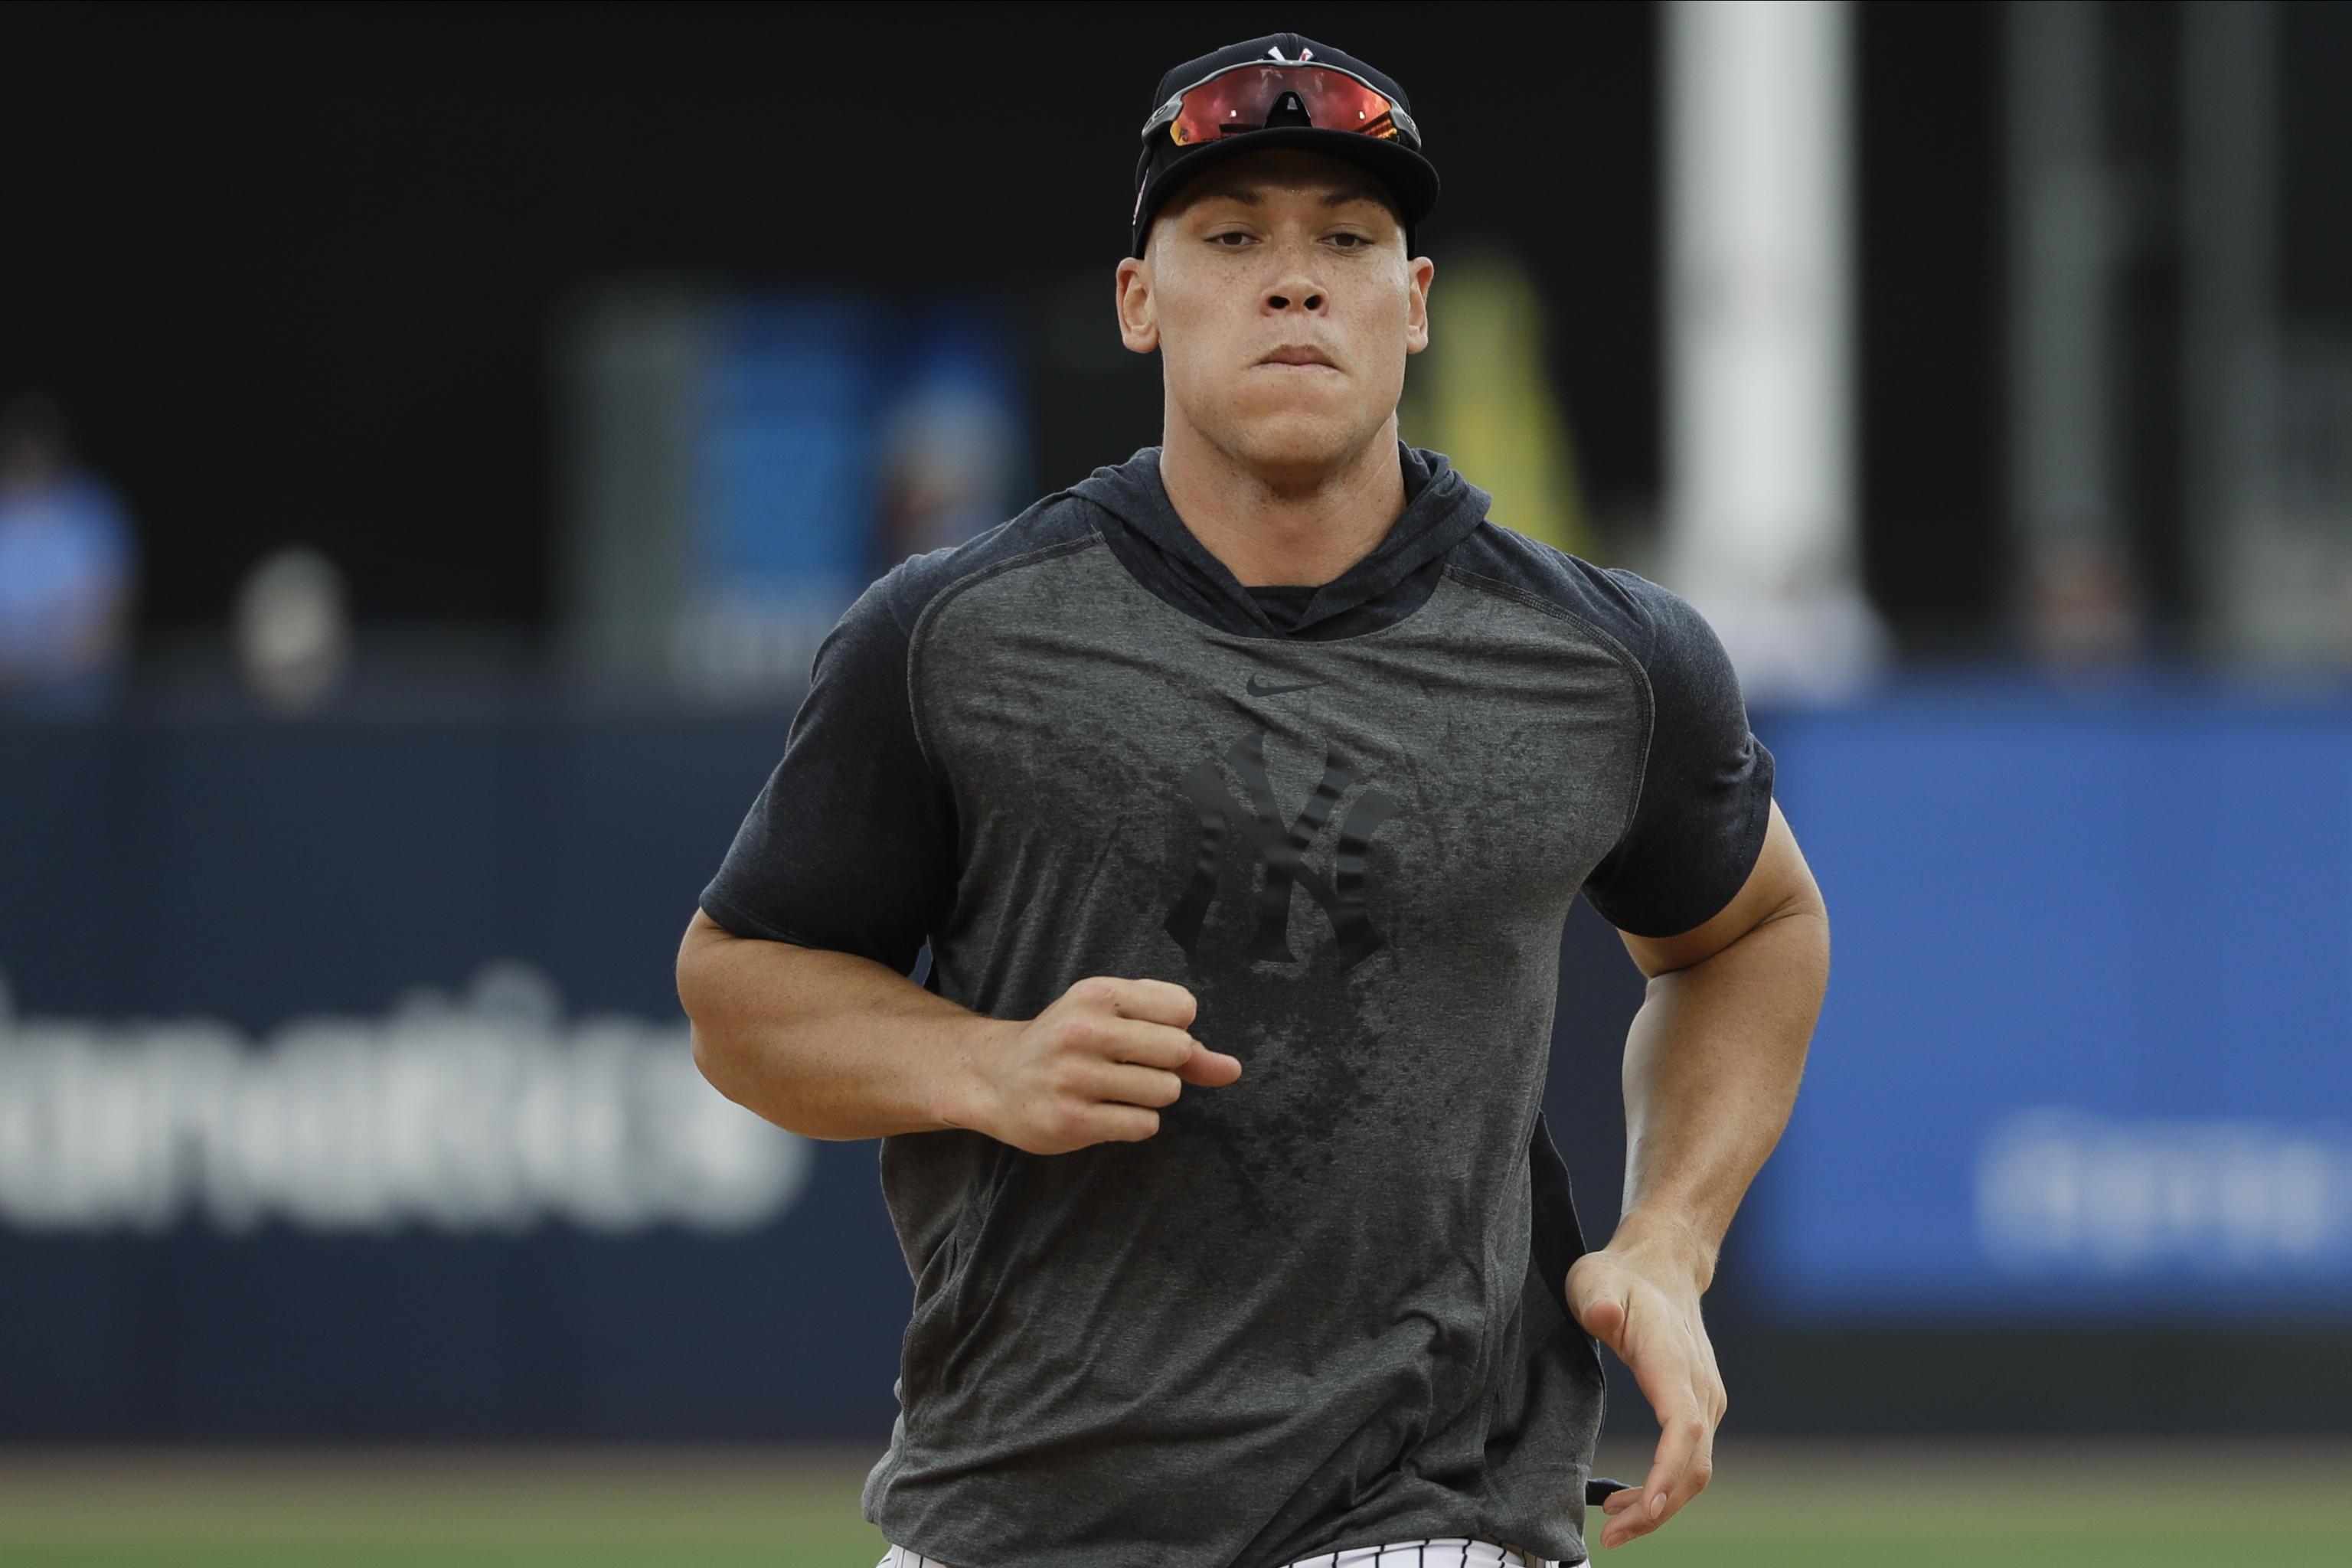 Yankees' Aaron Judge has stress fracture of his rib - Newsday